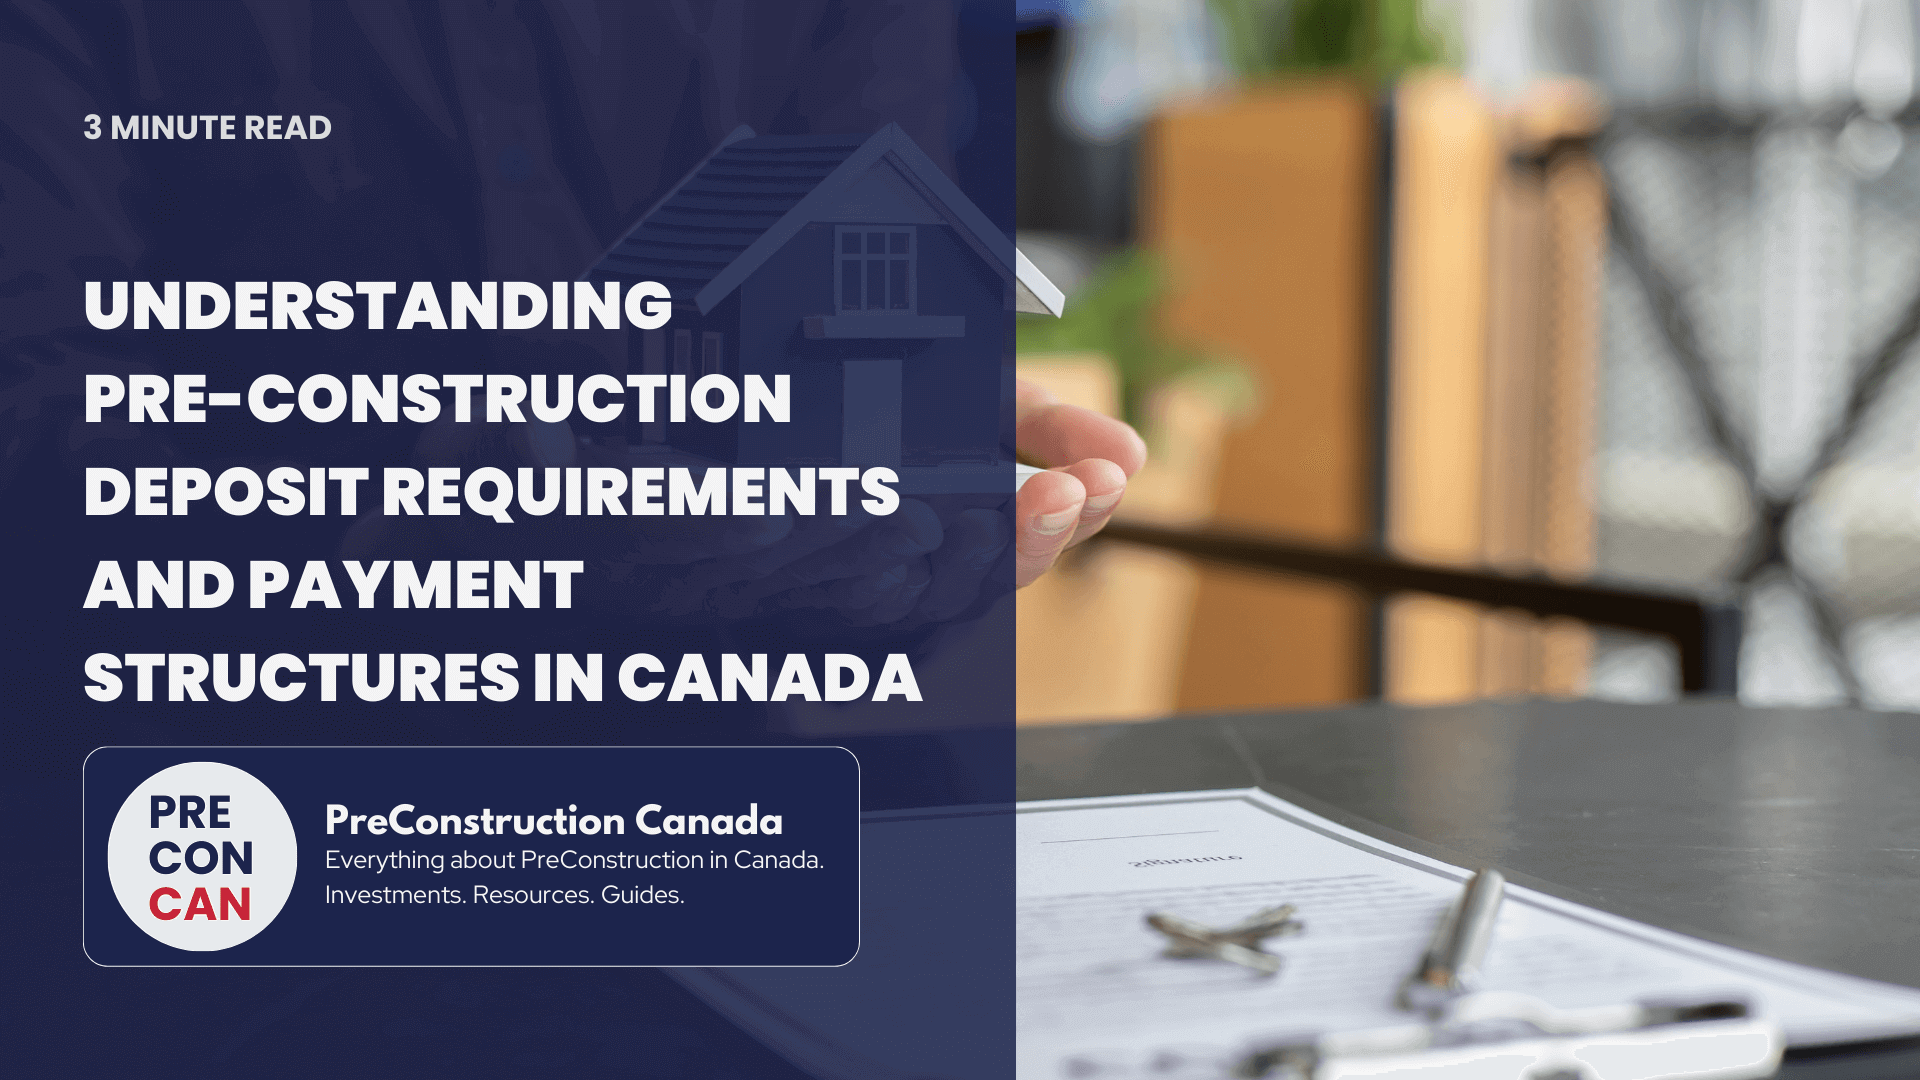 PreConstruction Deposit Requirements and Payment Structures in Canada - PreConstruction Canada